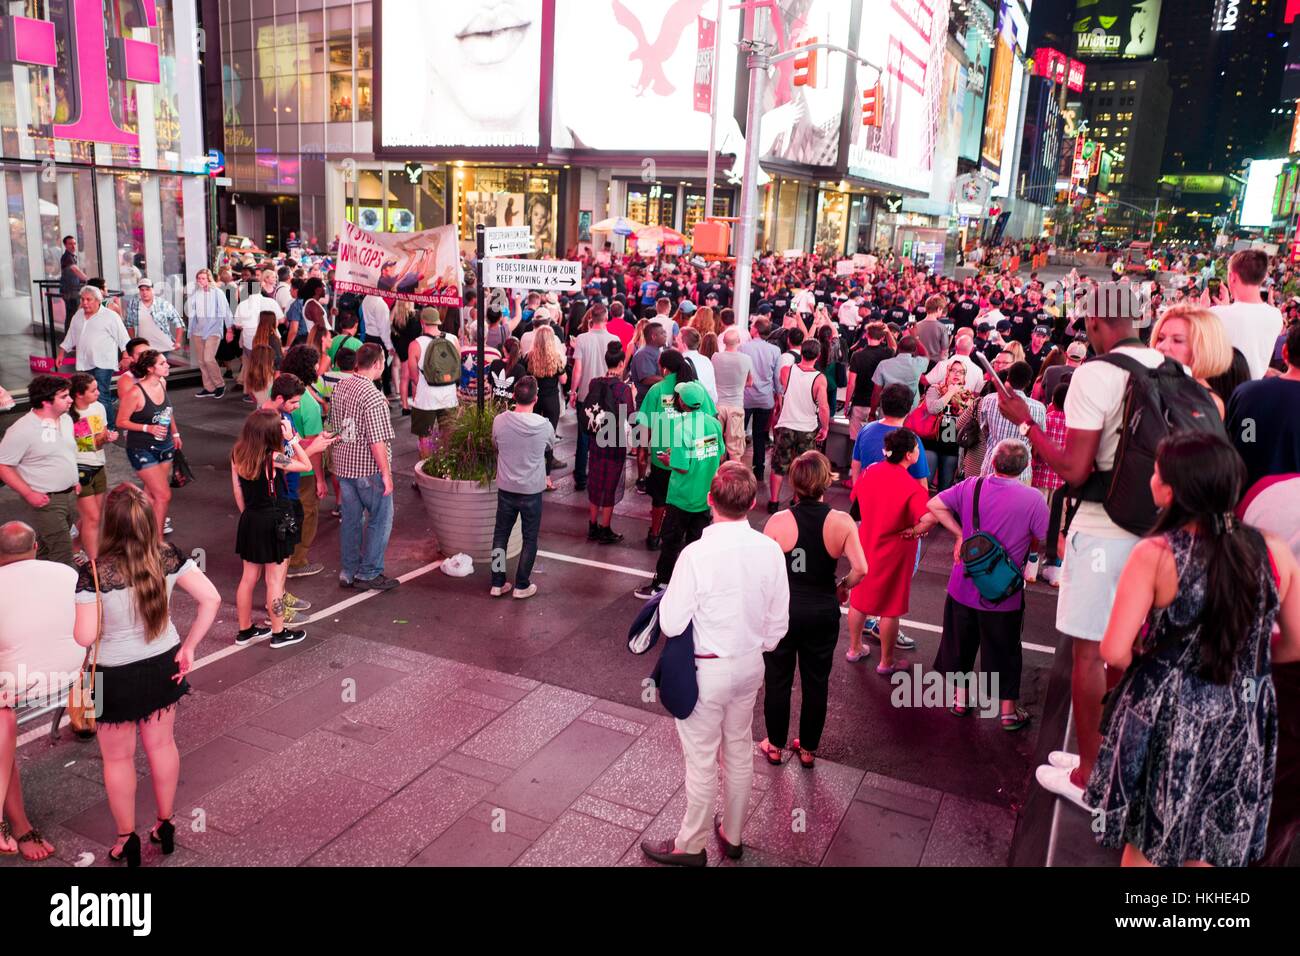 During a Black Lives Matter protest in New York City's Times Square following the shooting deaths of Alton Sterling and Philando Castile, activists block traffic and square off against a line of New York Police Department (NYPD) riot police as tourists look on, 2016. Stock Photo